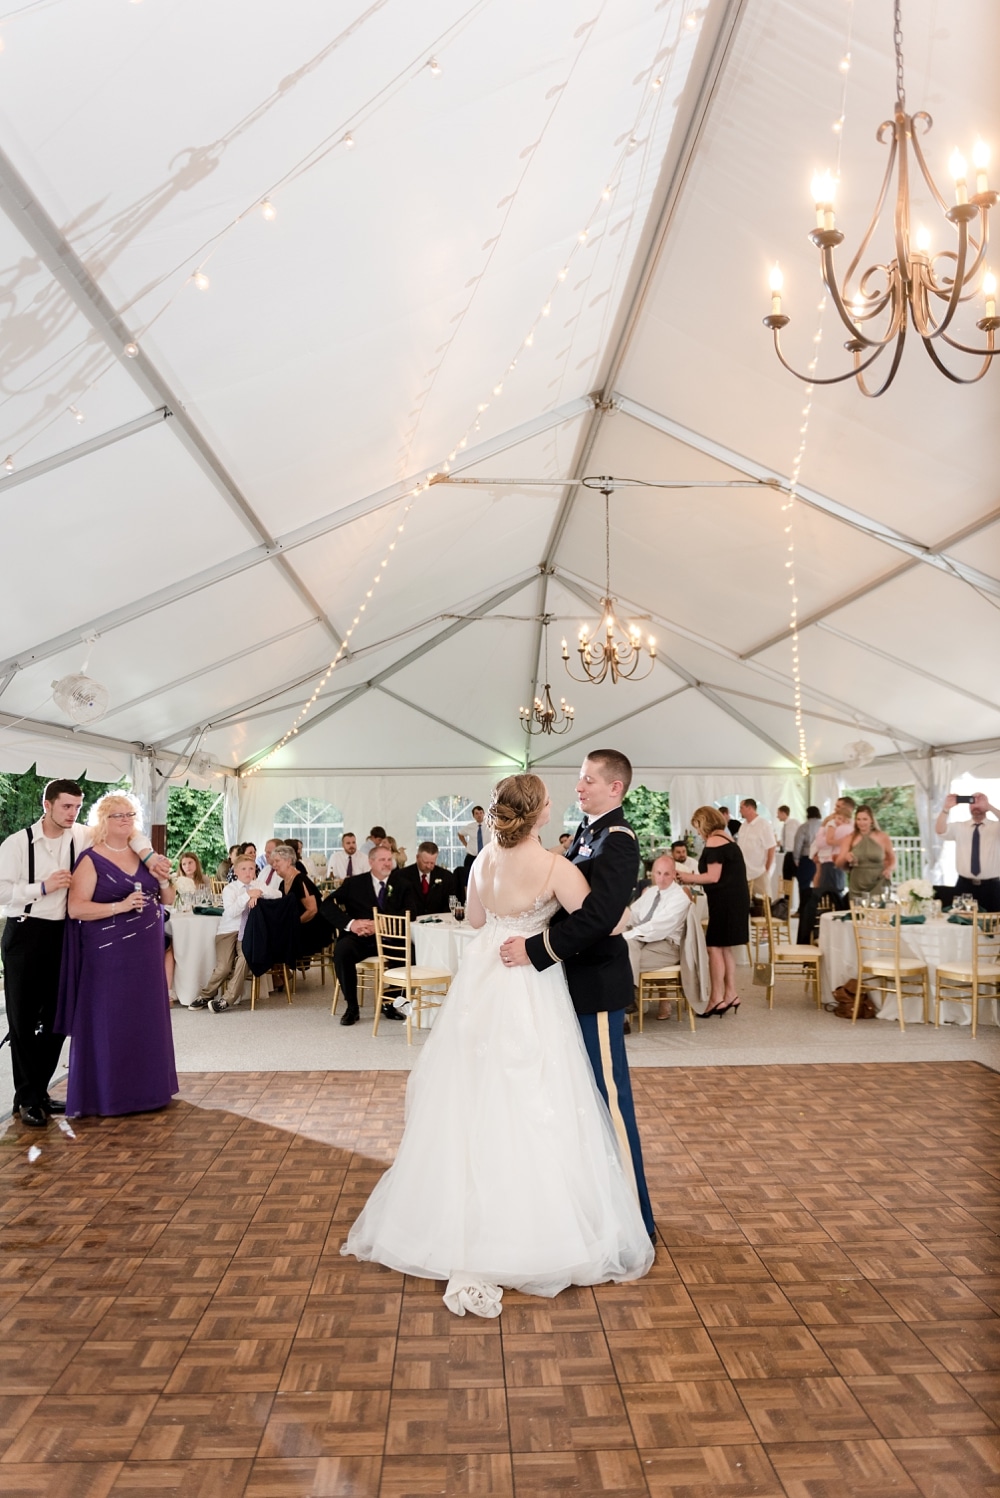 Bride and groom first dance under tent during reception at Rust Manor House